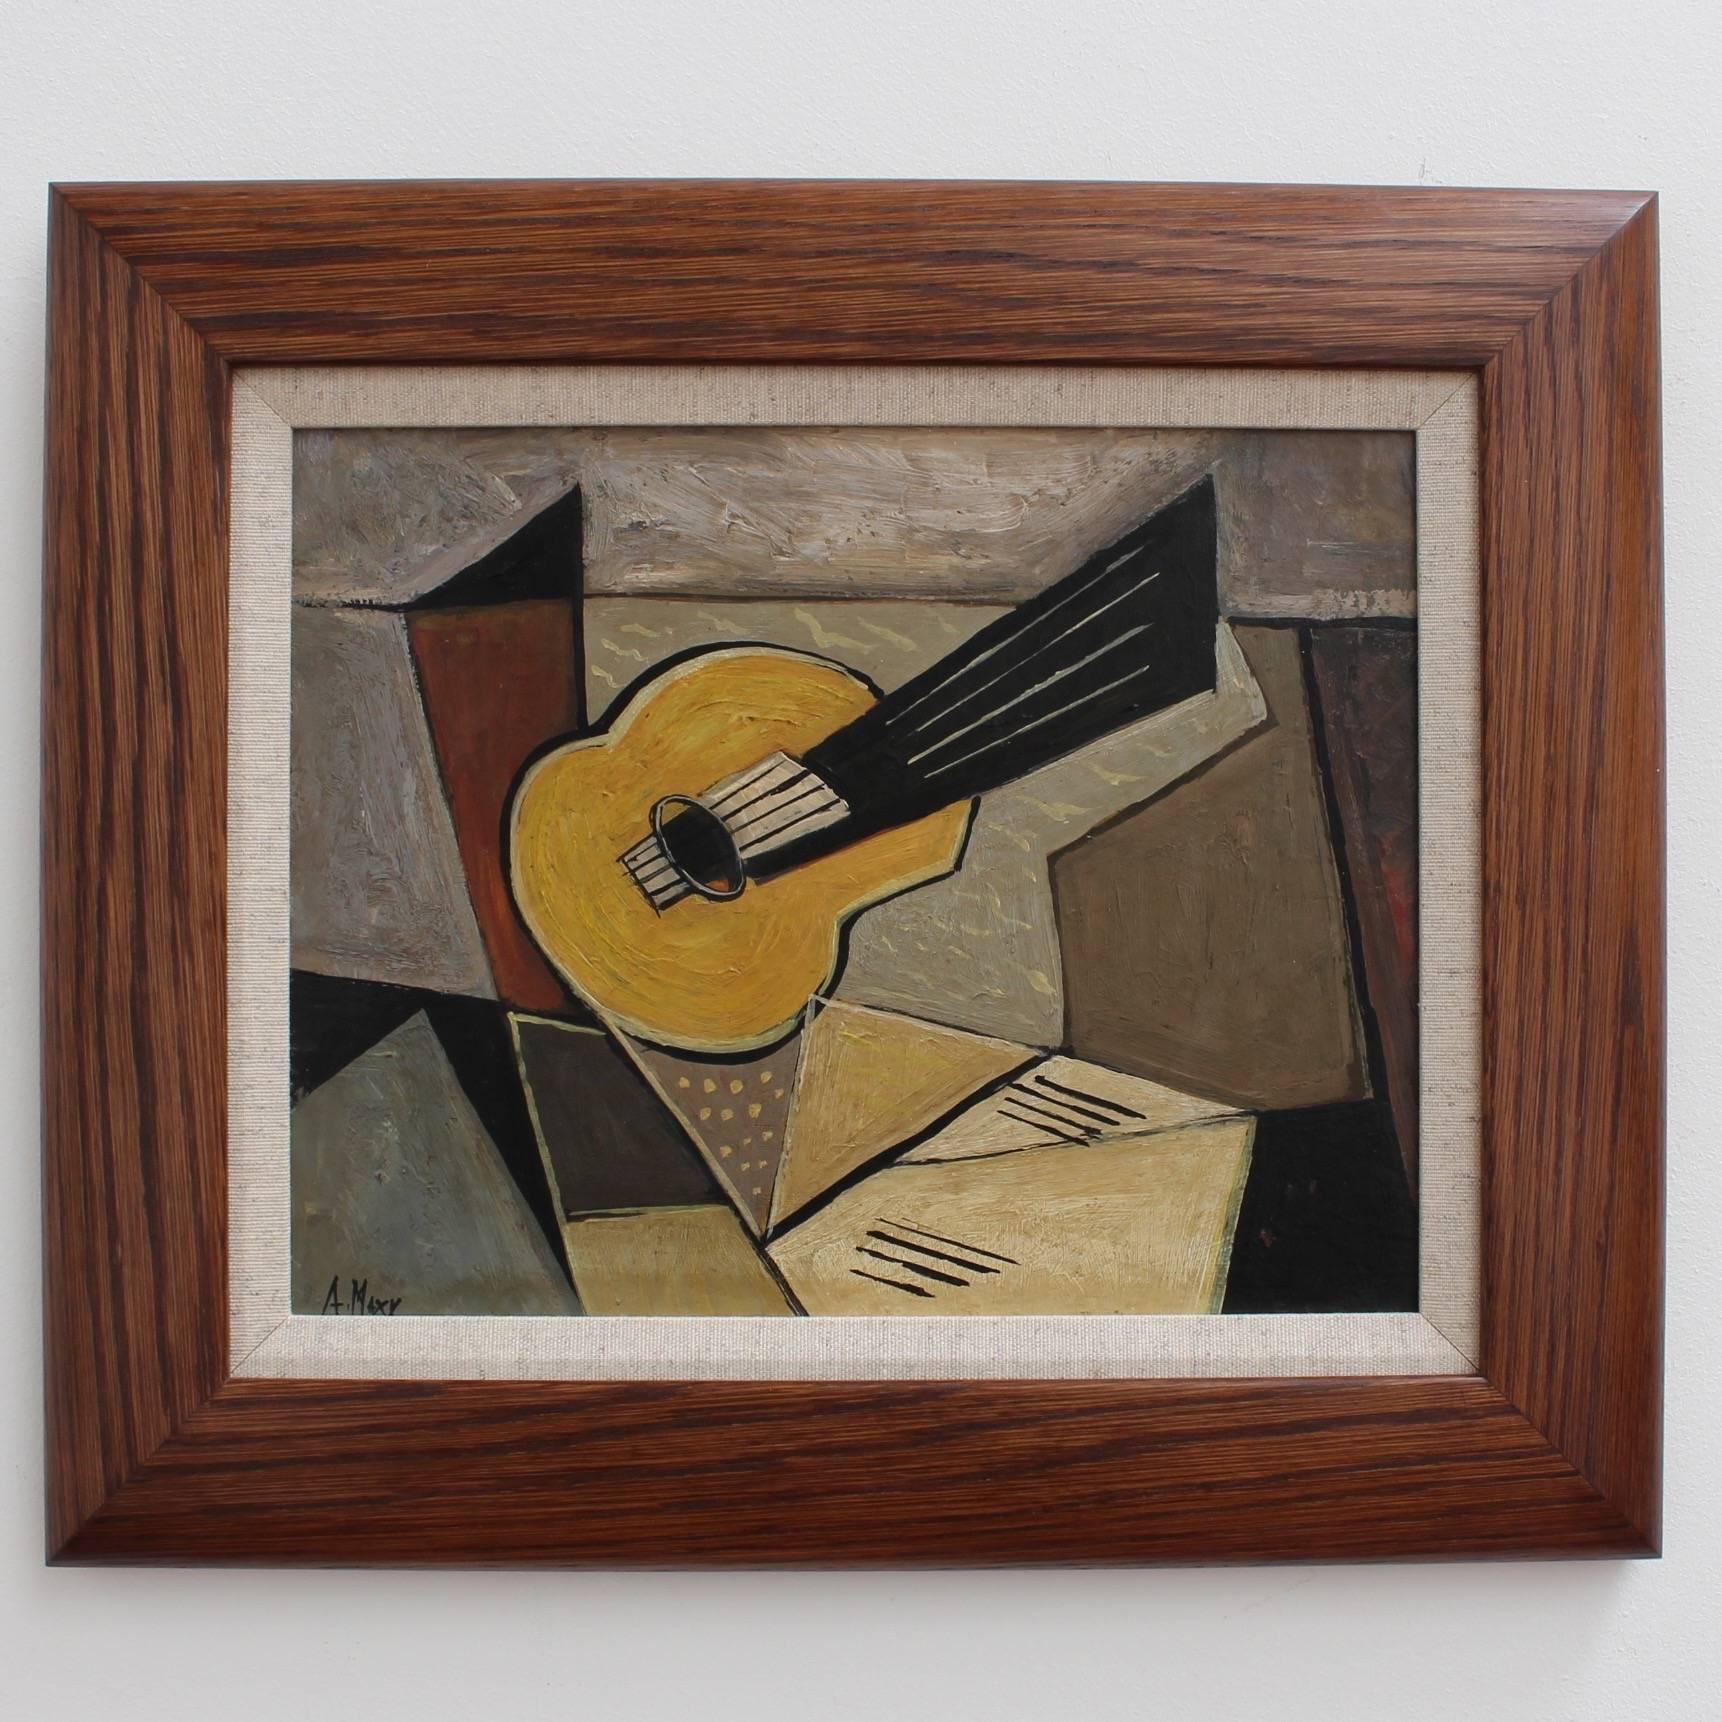 'Musical Geometry', oil on board, still-life, by A. Maxy (circa 1940s - 1960s). Geometric shapes and lines delineate a classical guitar in yellow and black in this post-war artwork. Inspiration surely came from Georges Braque. From the 'Berlin